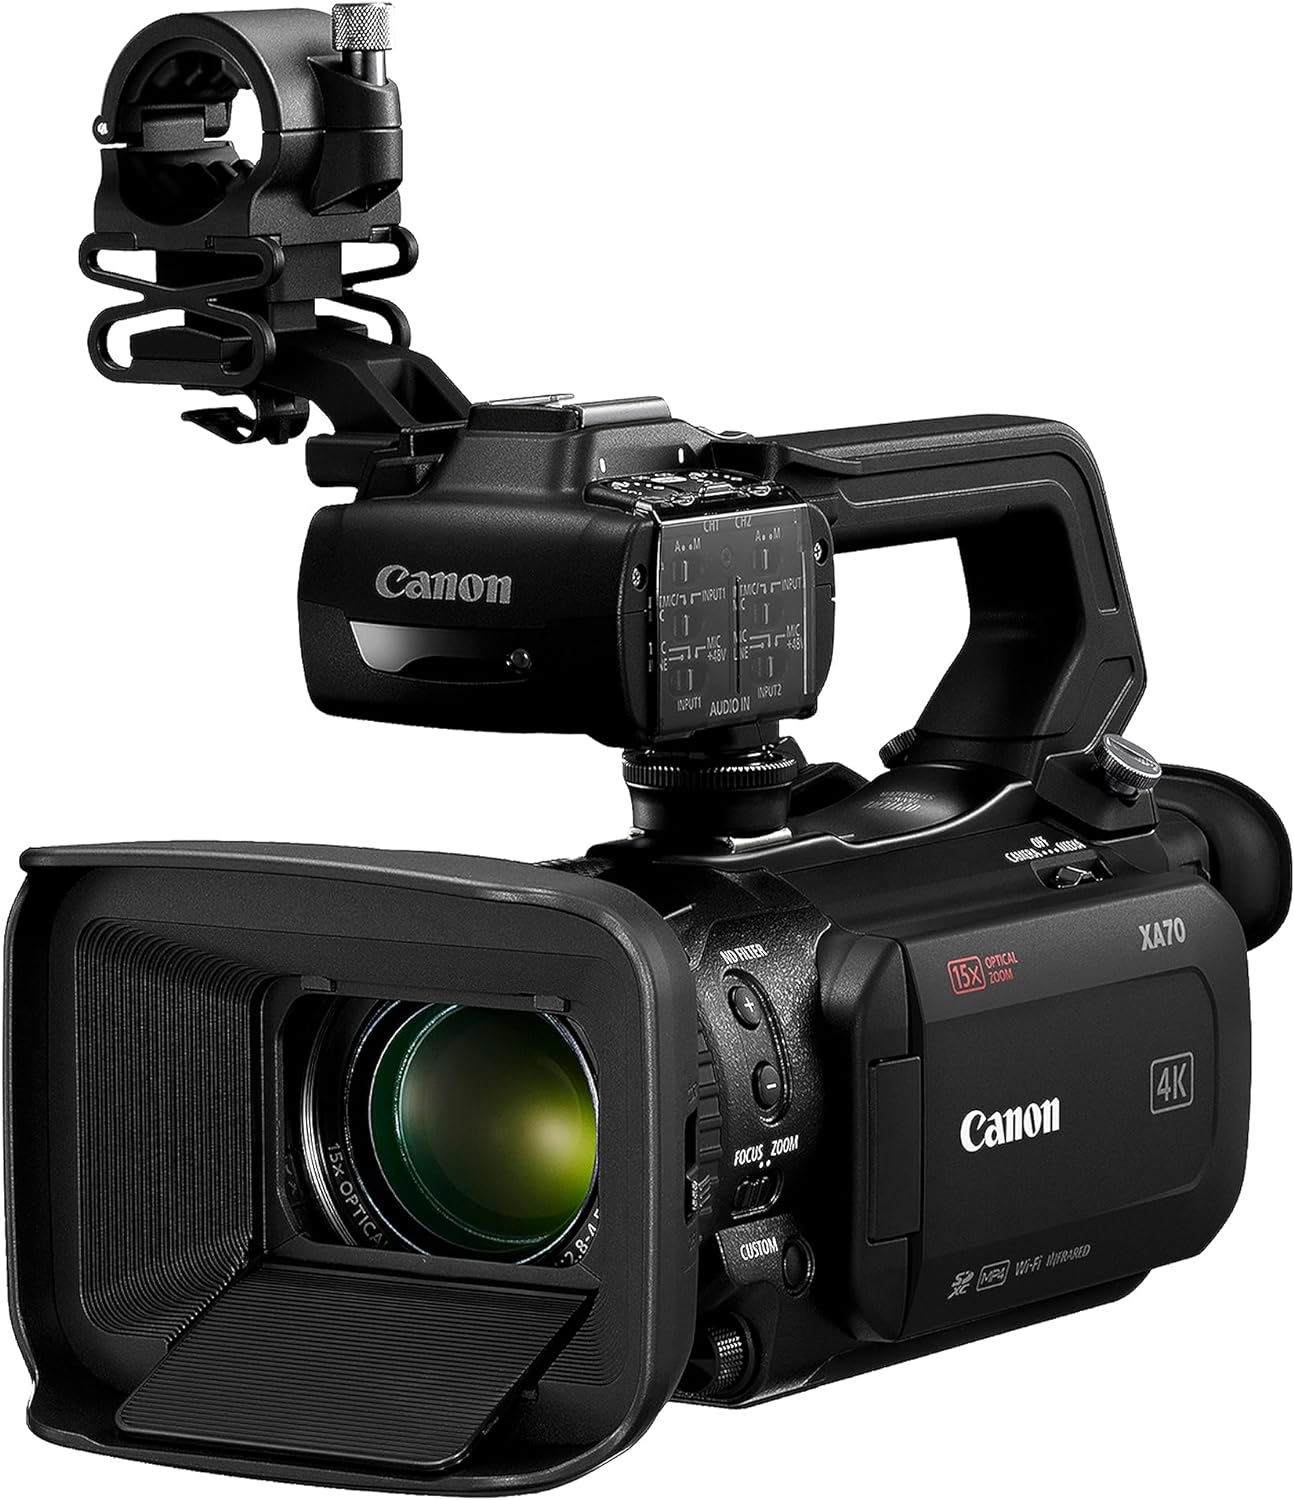 Introduction to Camcorders: A Beginner's Guide